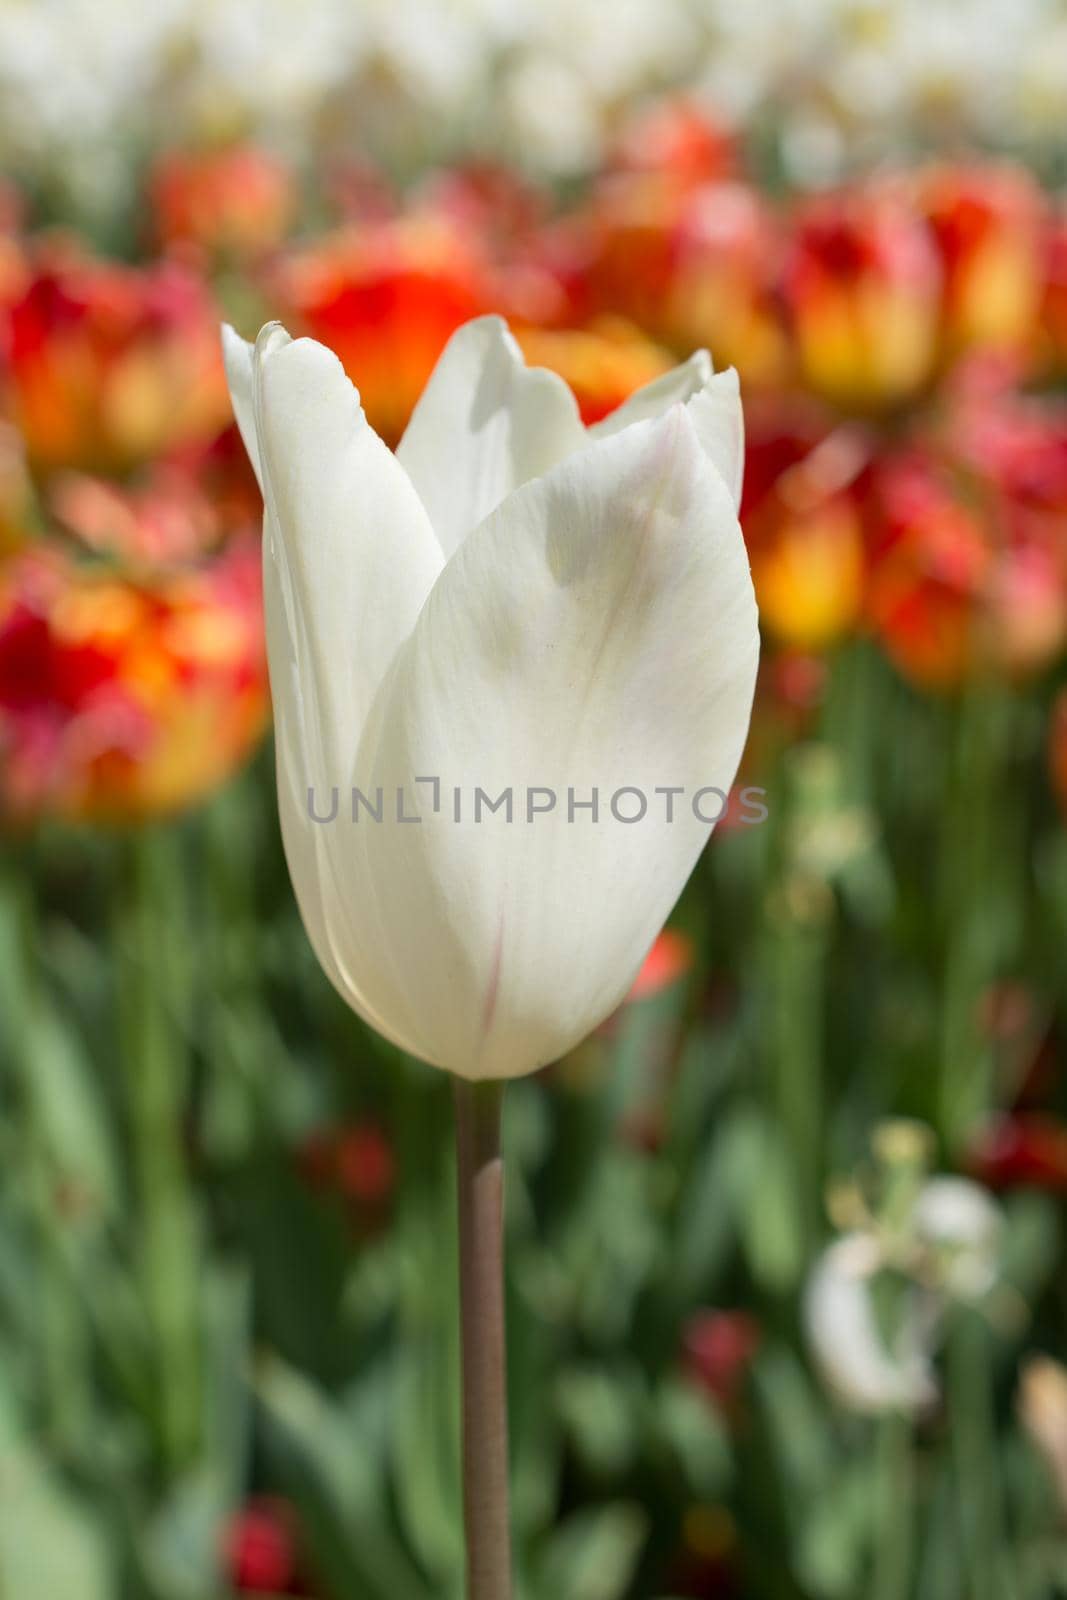 Outstanding colorful tulip flower bloom in the spring  garden